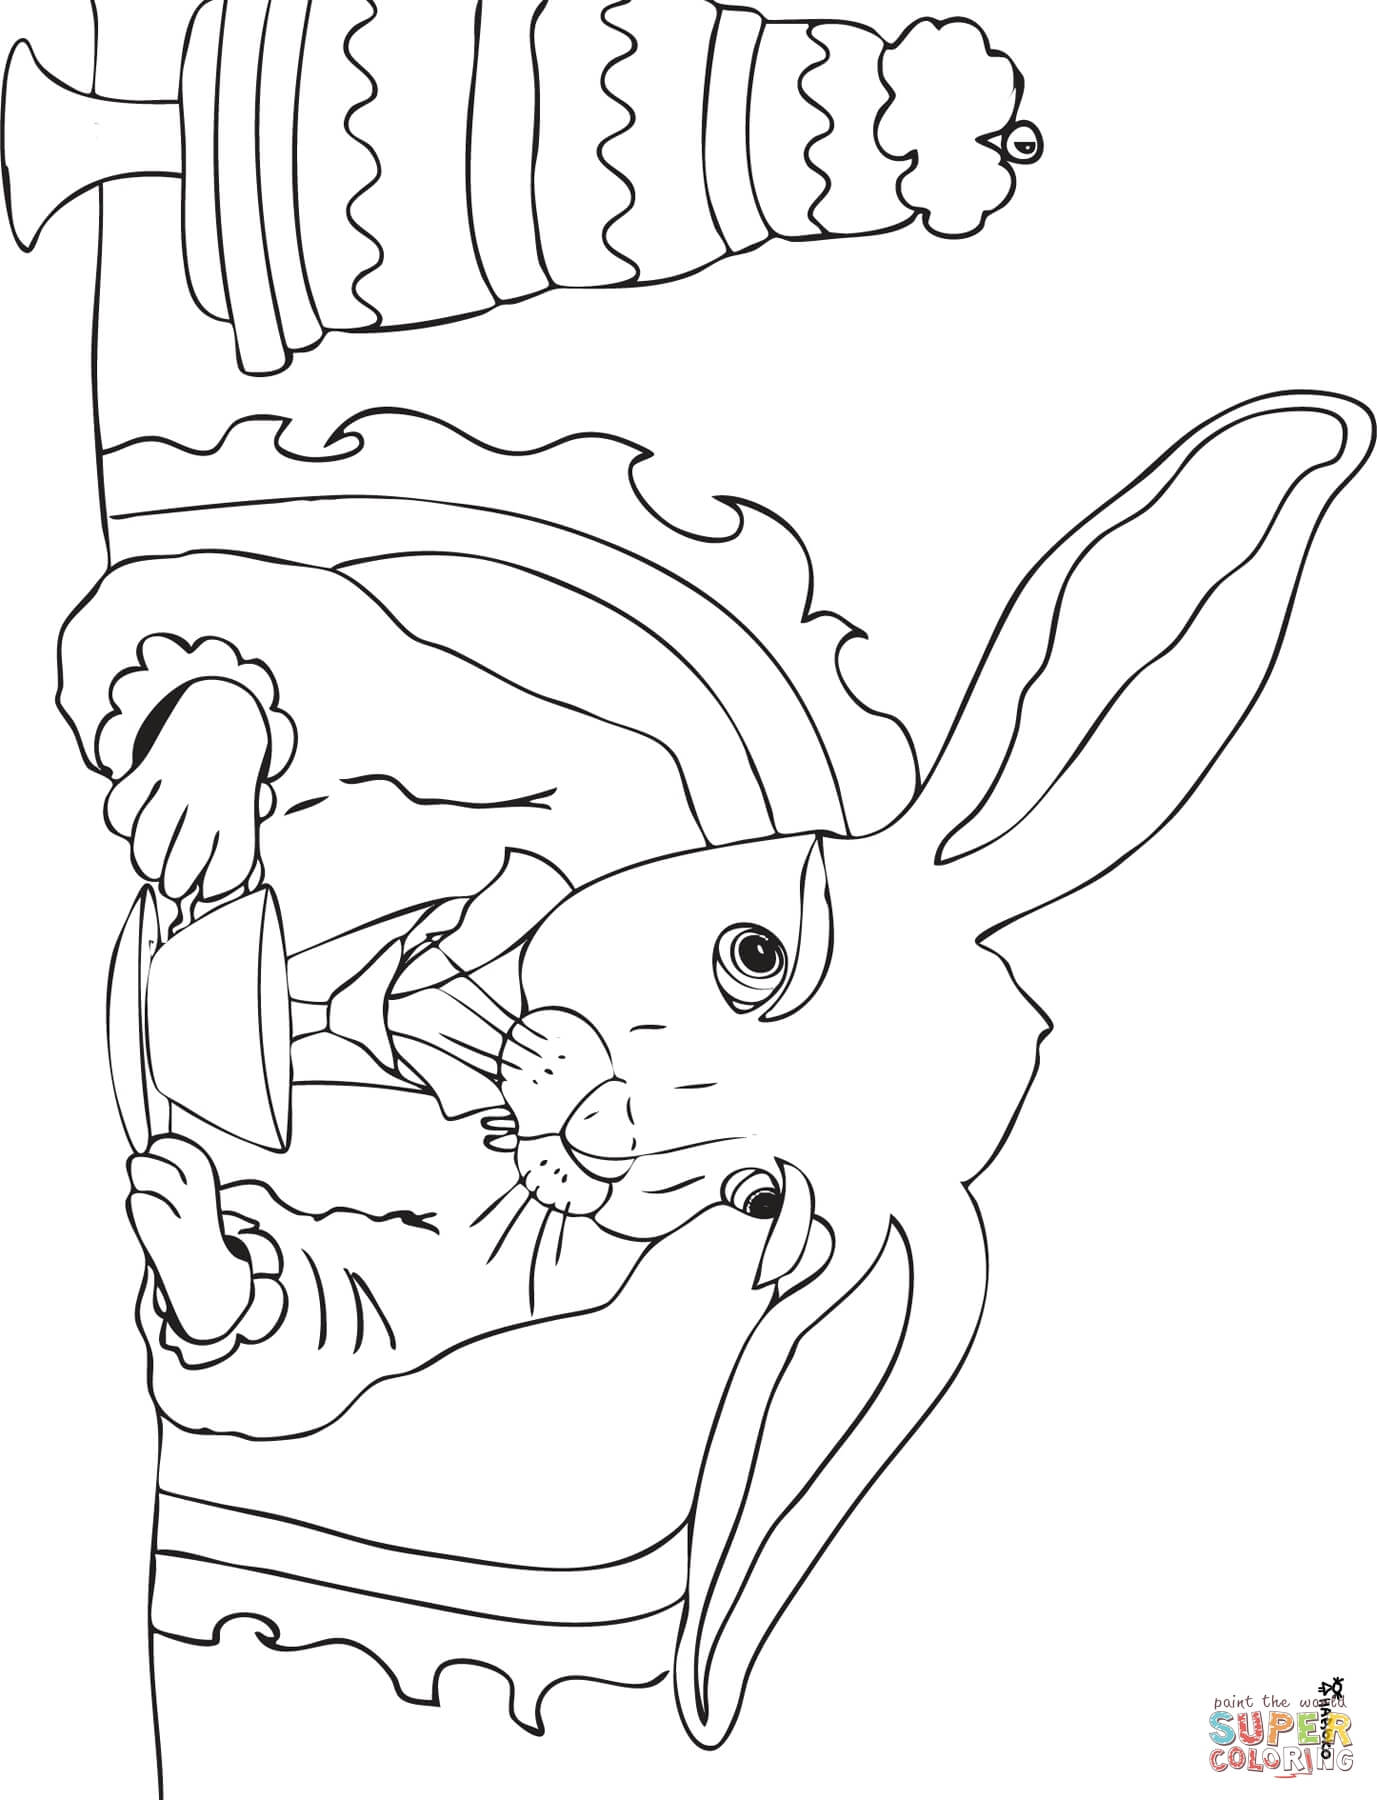 Mad Hatter Tea Party coloring page | Free Printable Coloring Pages